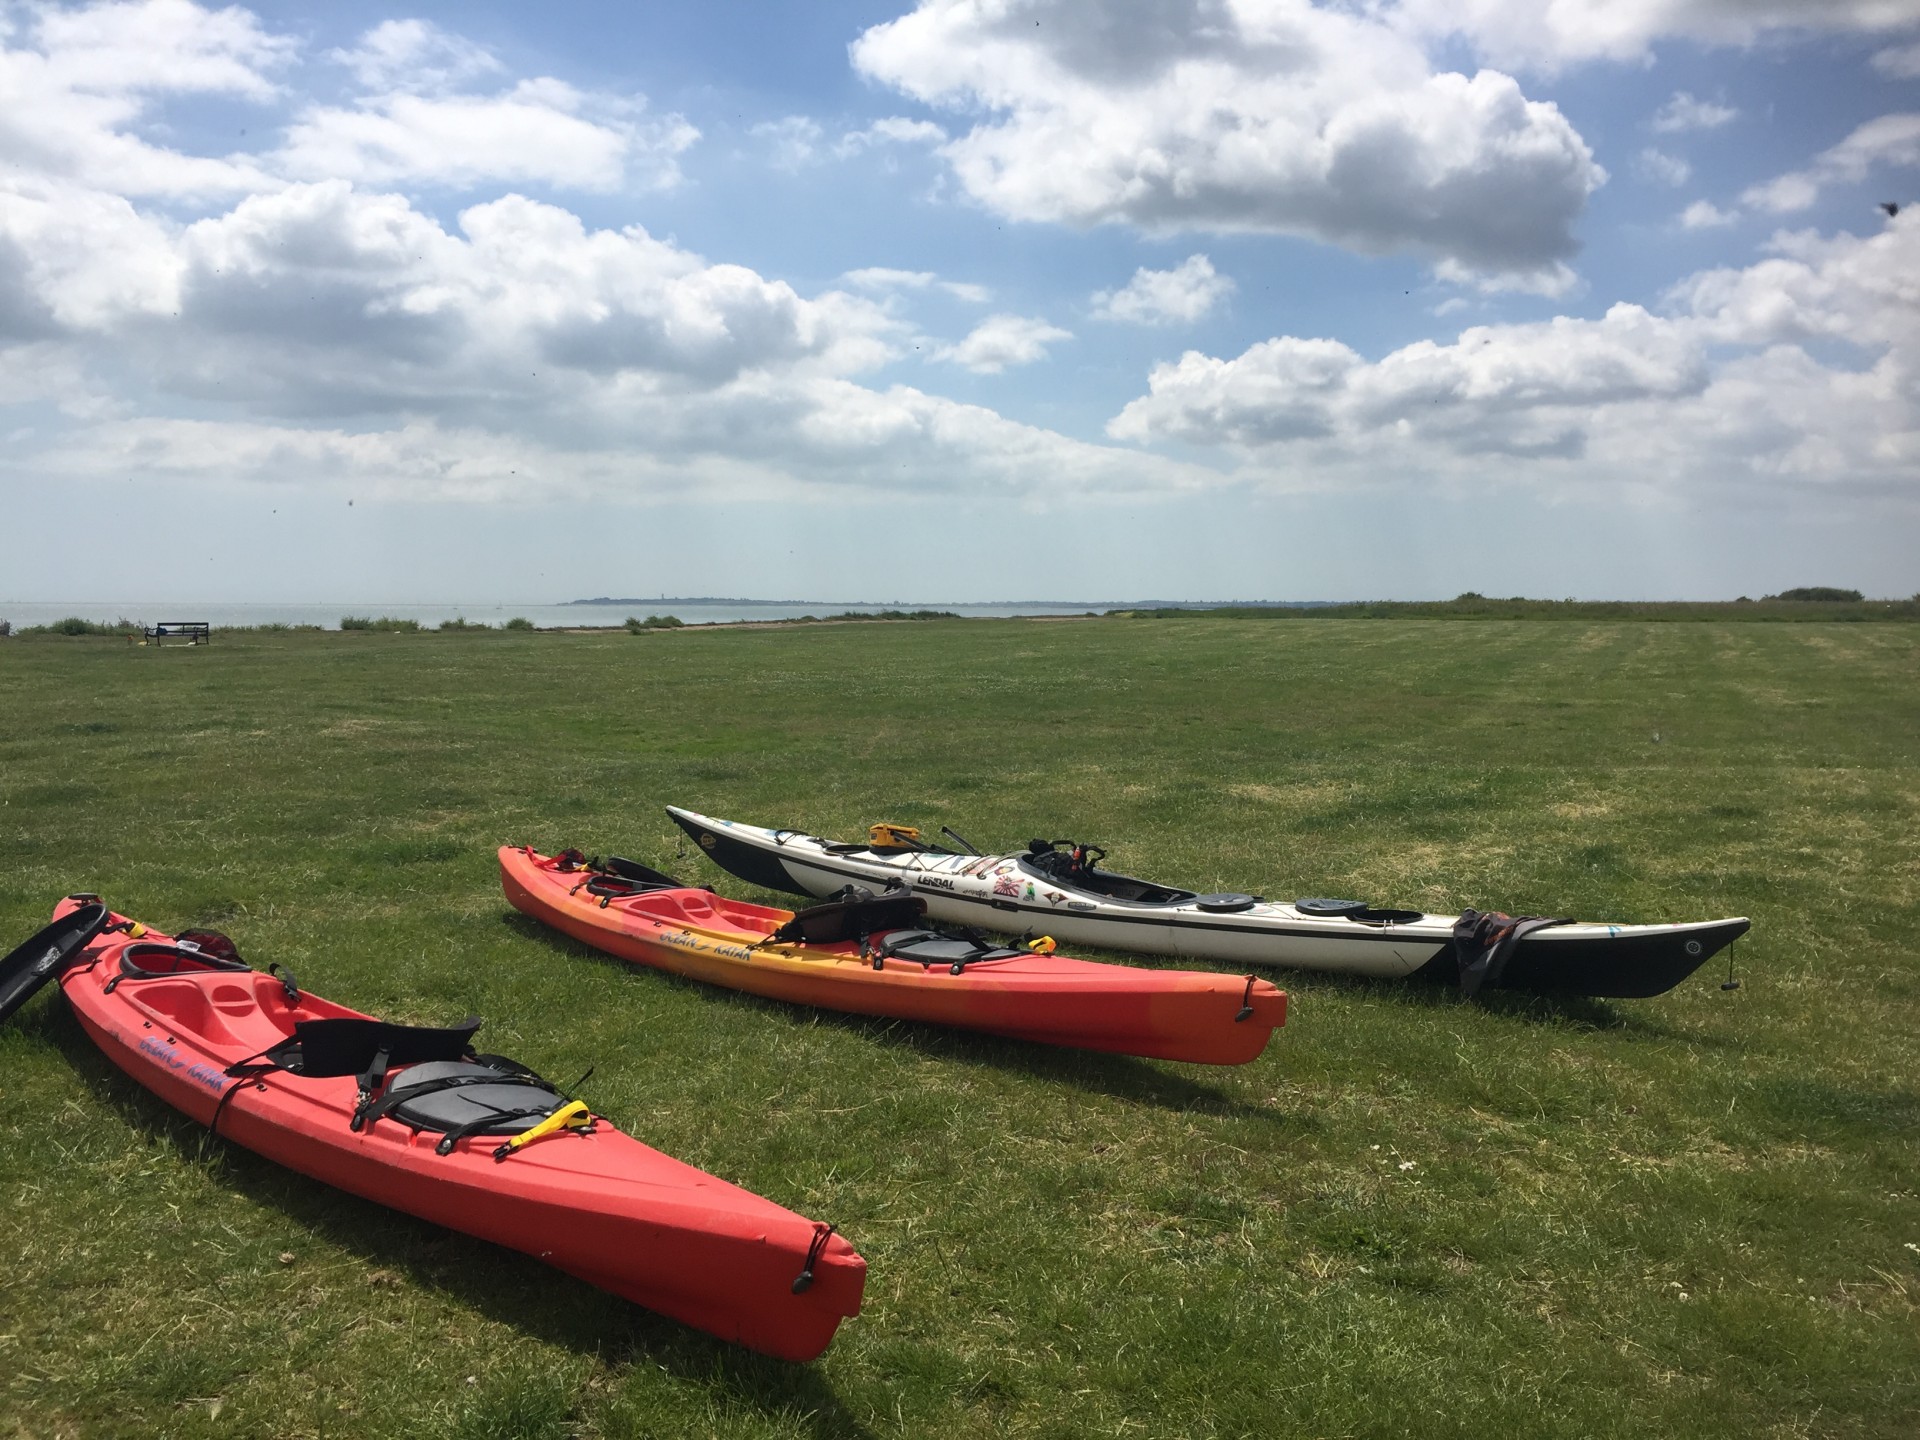 Kayaks on the grass ready to launch.